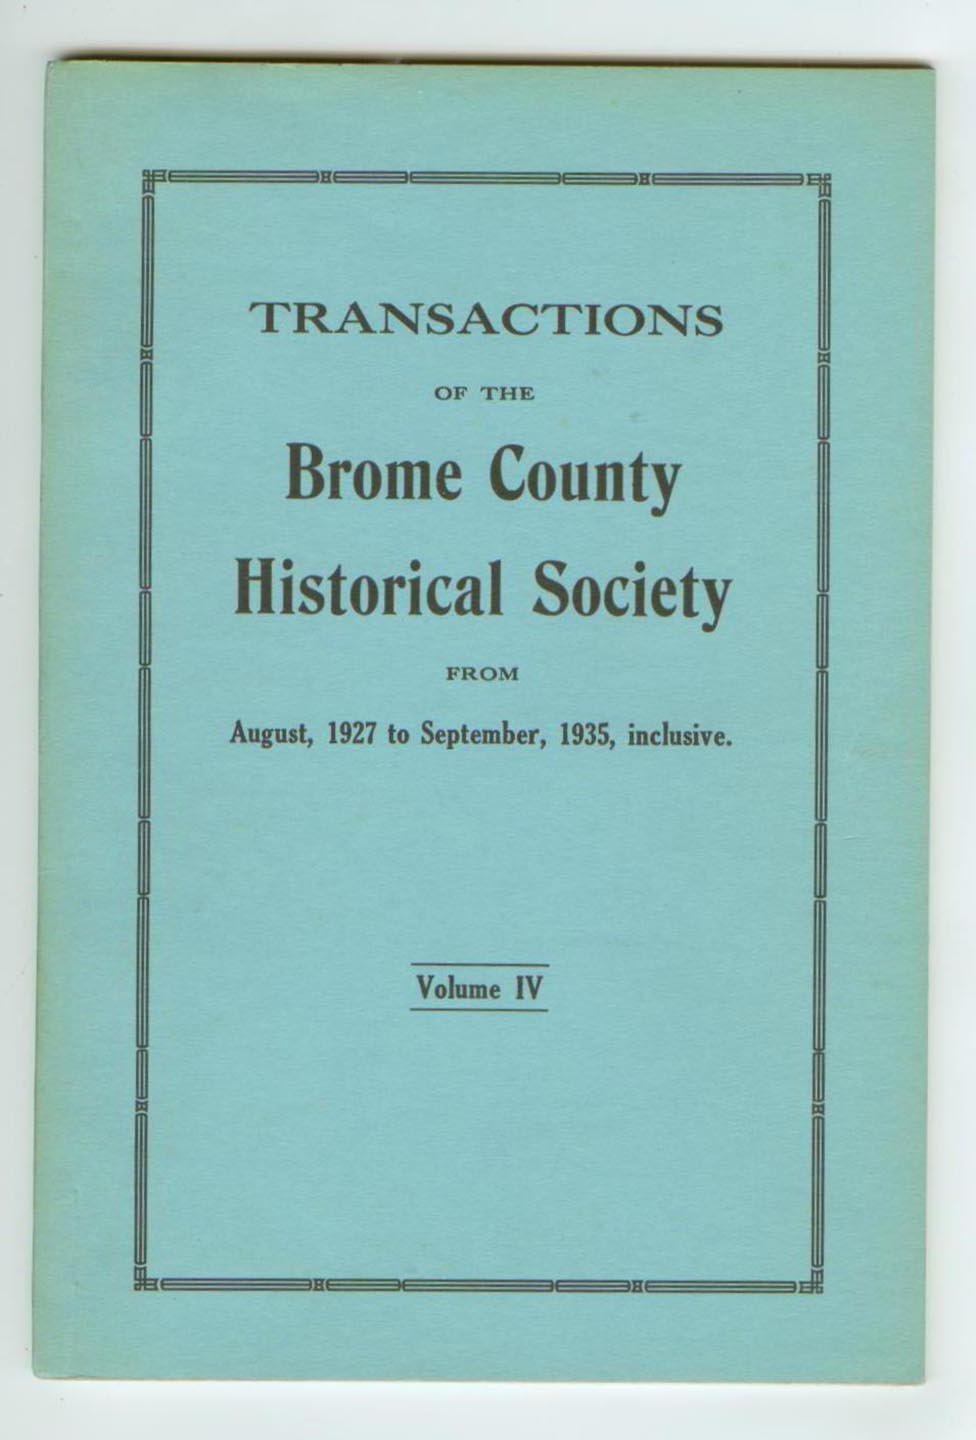 Transactions of the Brome County Historical Society From August, 1927 to September, 1935, inclusive. Volume IV